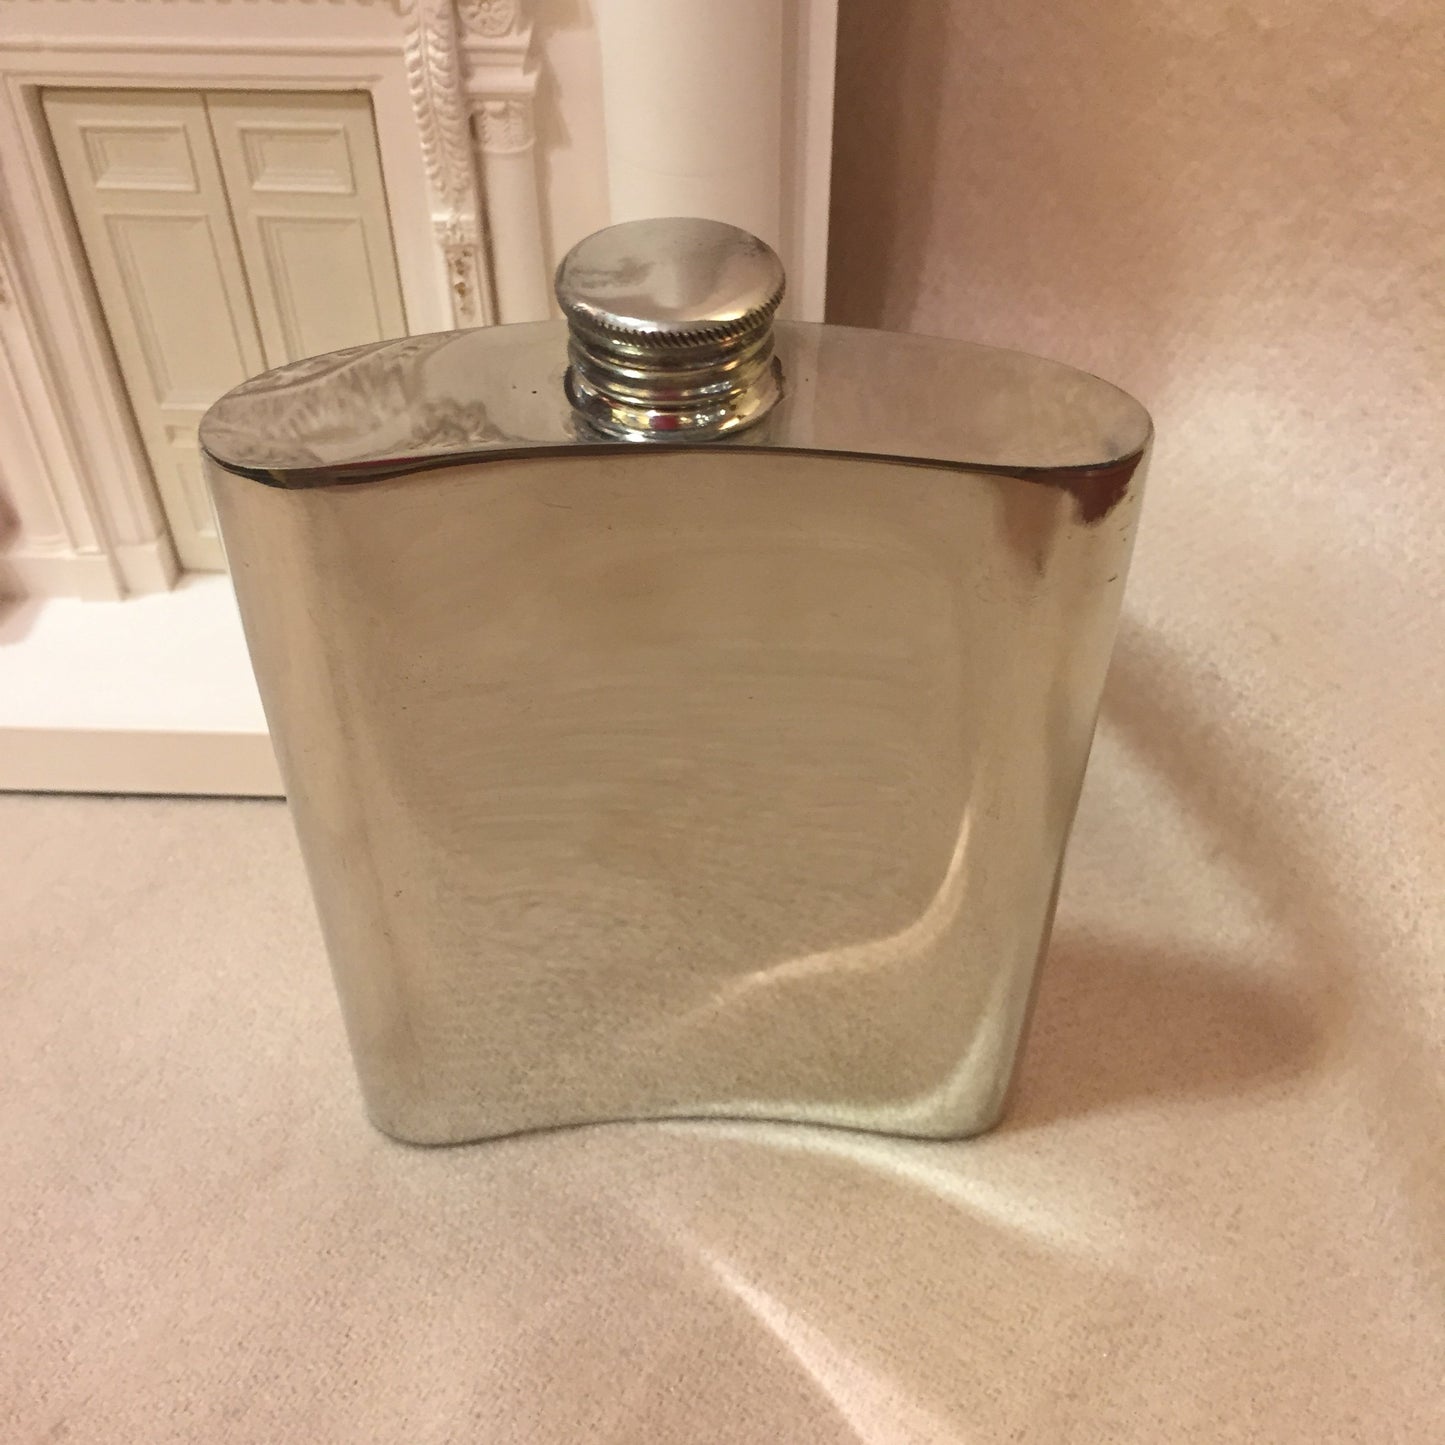 Pewter Flask | 8 Oz | Curved Flask | Flat Top | Solid Pewter Hip Flask | Engraves Beautifully | Made in England-Flask-Sterling-and-Burke